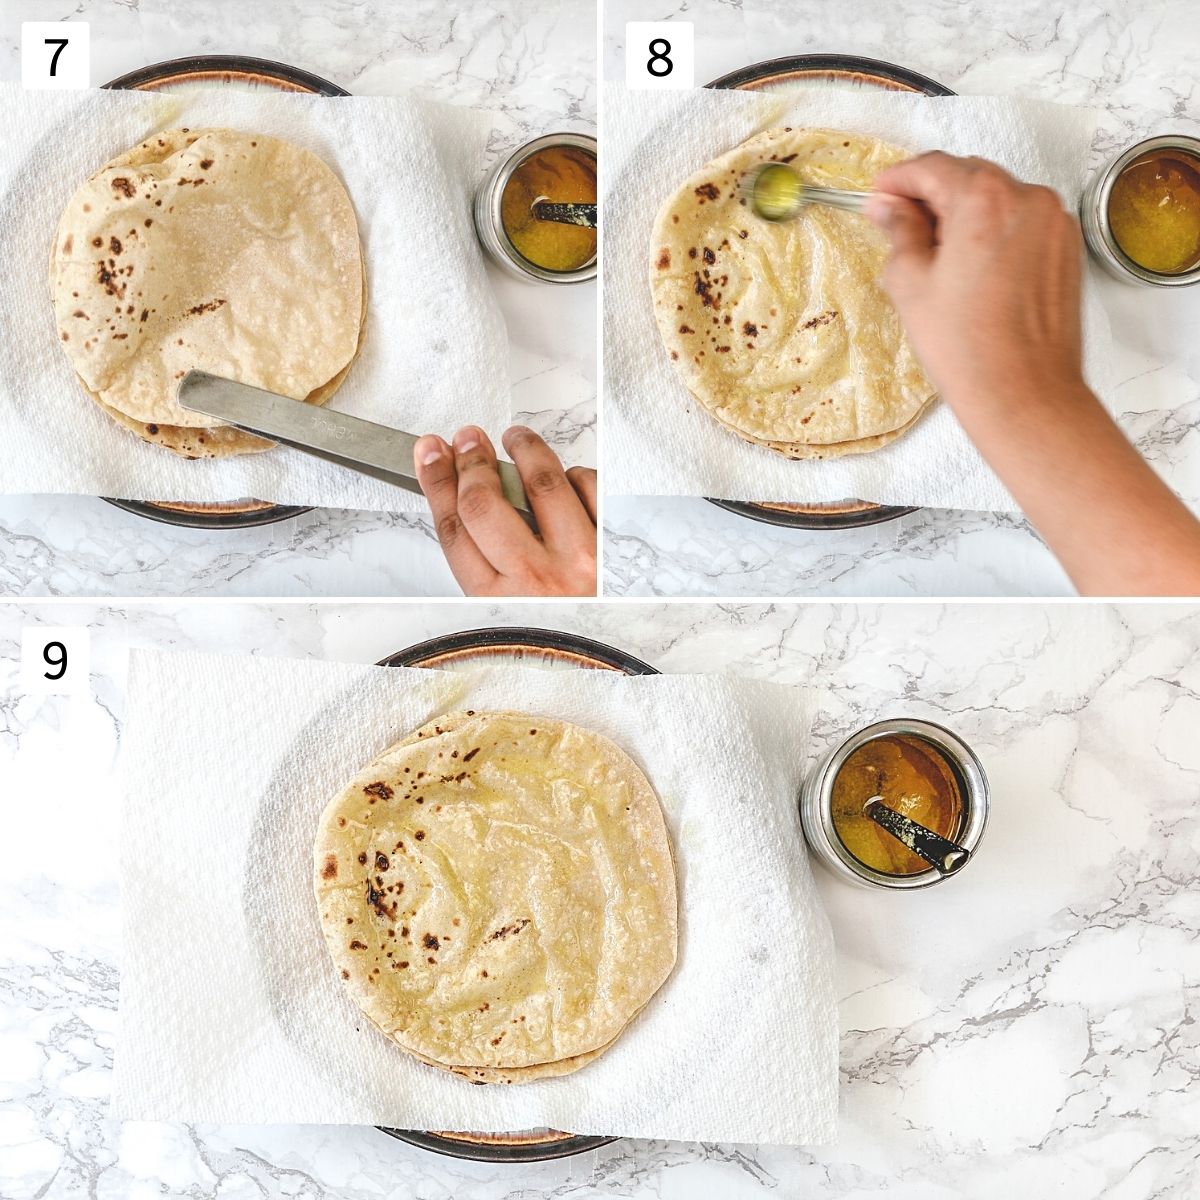 Collage of 3 images showing placing roti, applying ghee and a stack of roti.